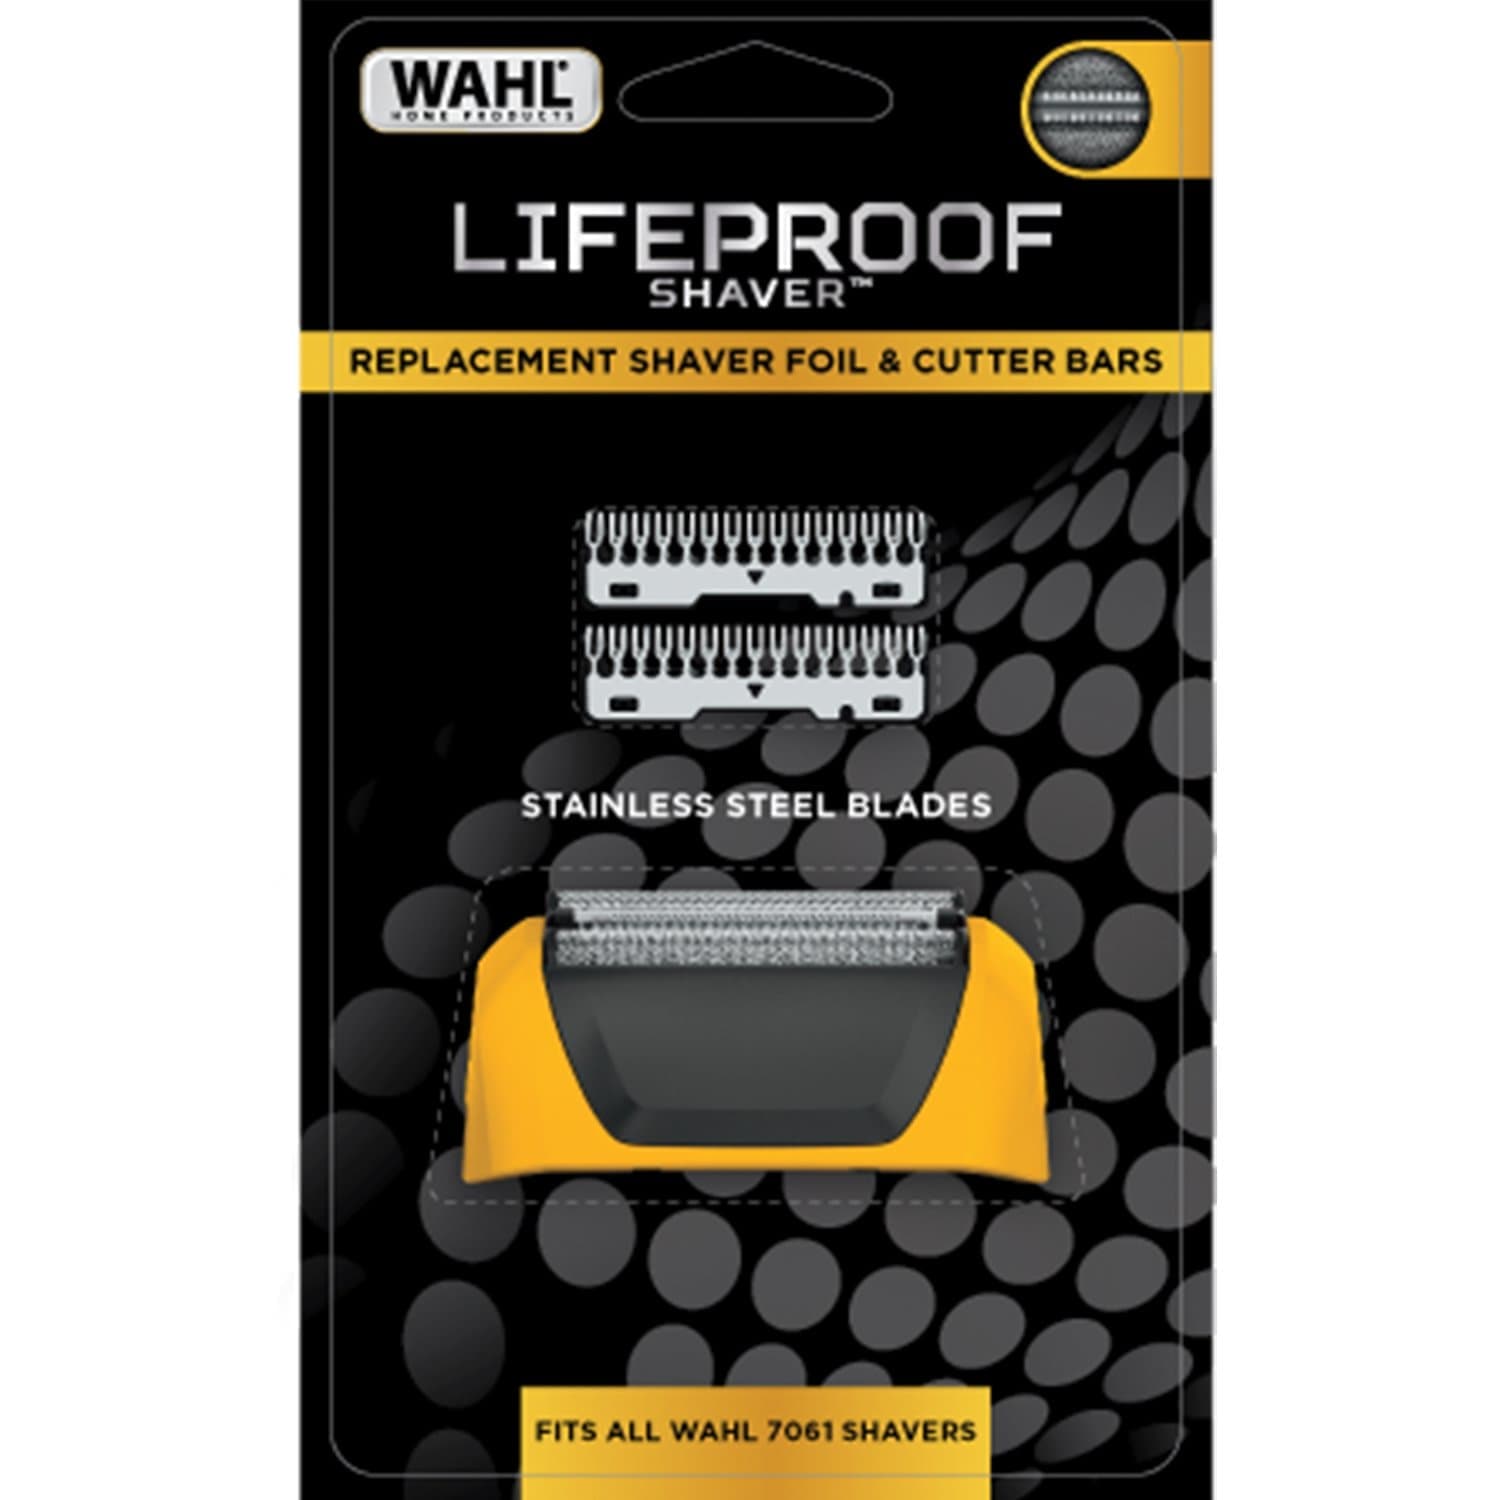 Wahl Life Proof Shaver